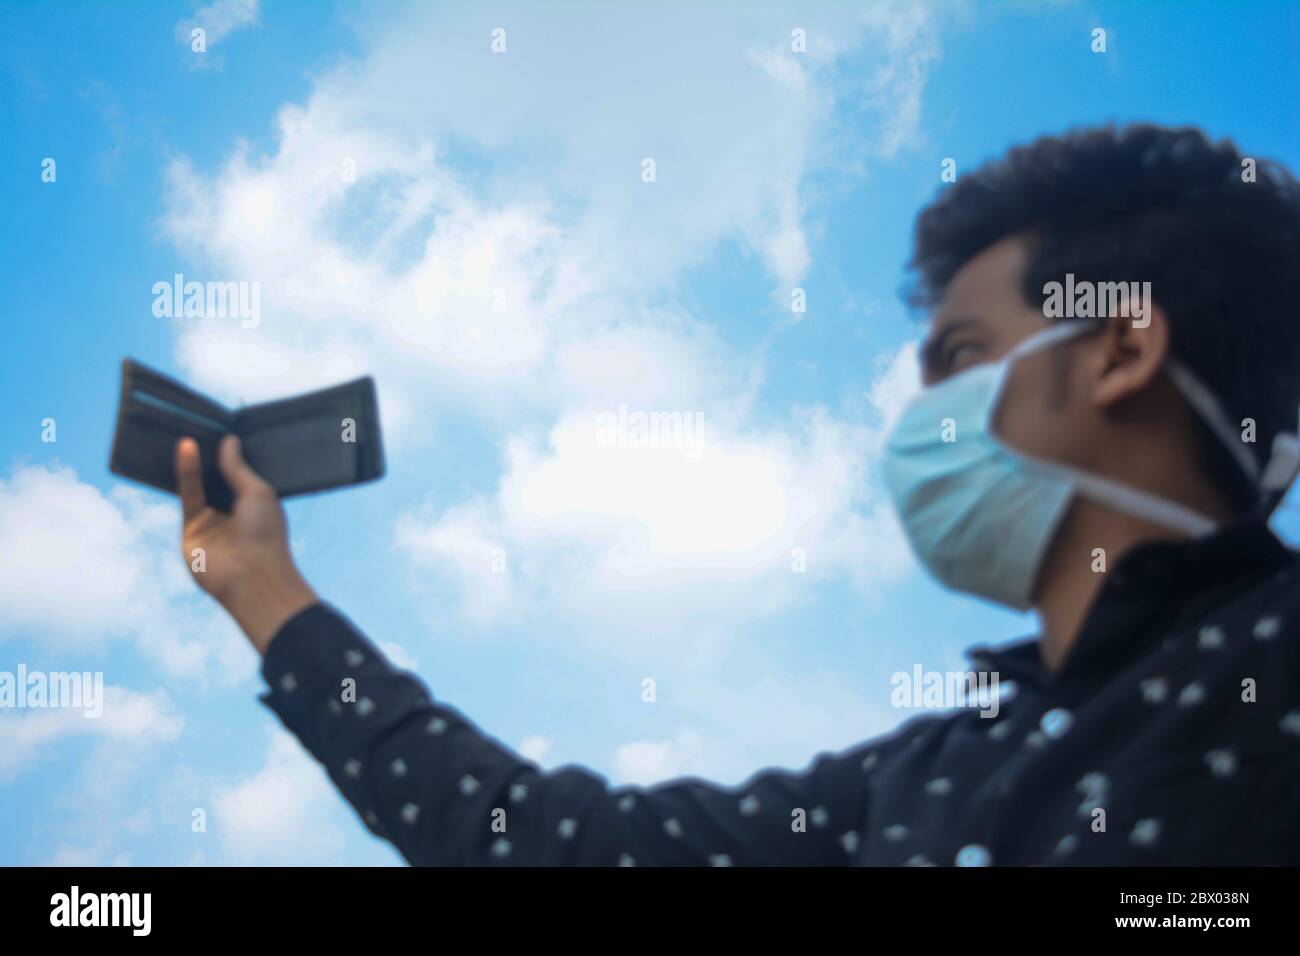 Man wearing face mask and showing his wallet on blue sky background.selective focus on sky. Stock Photo